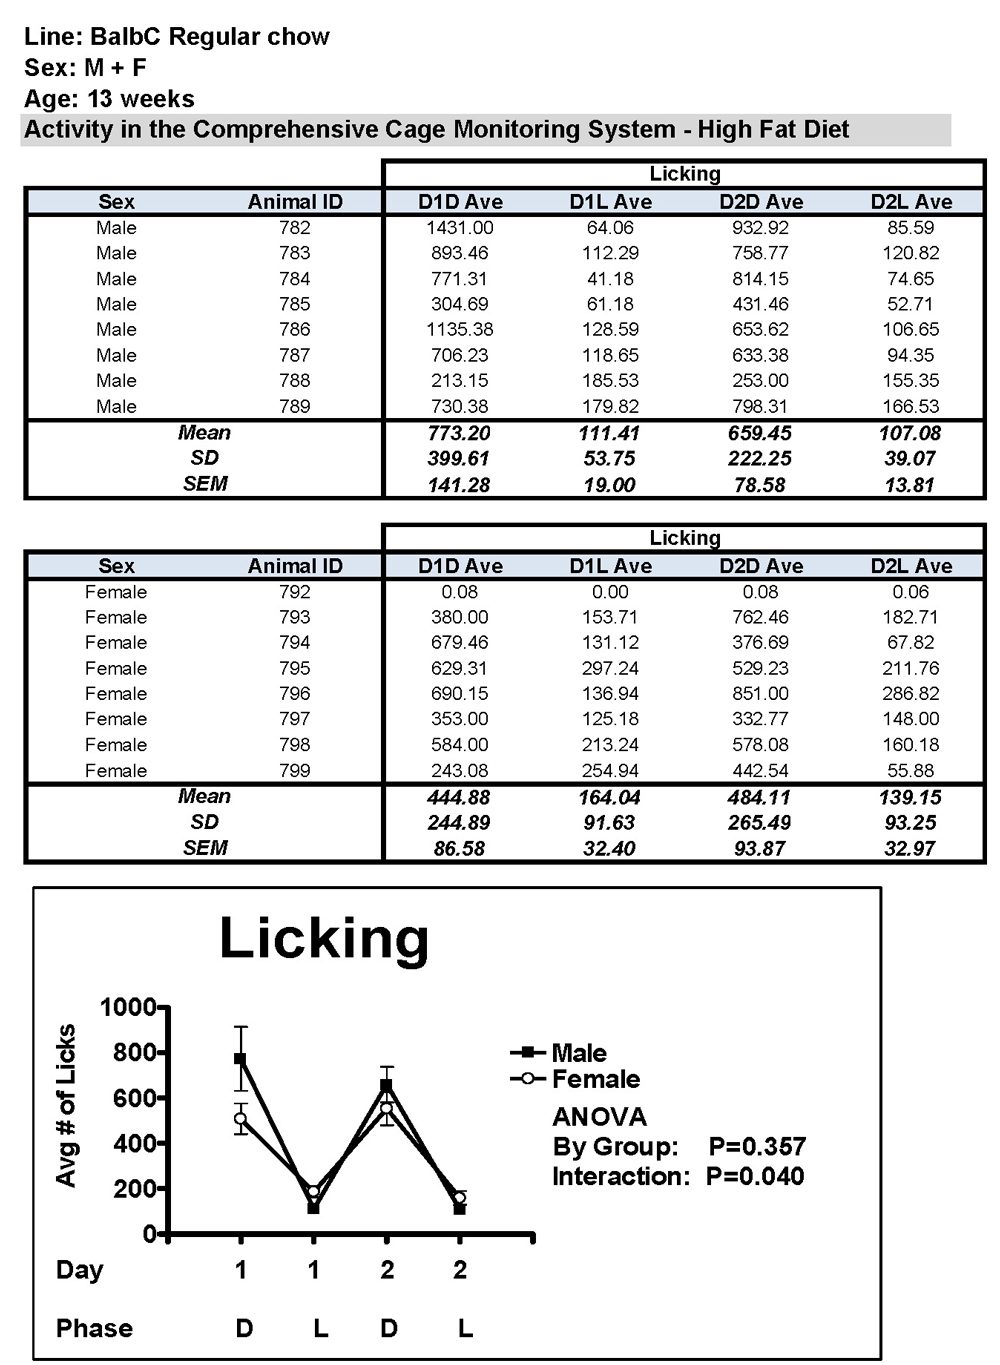 Licking Data and Chart